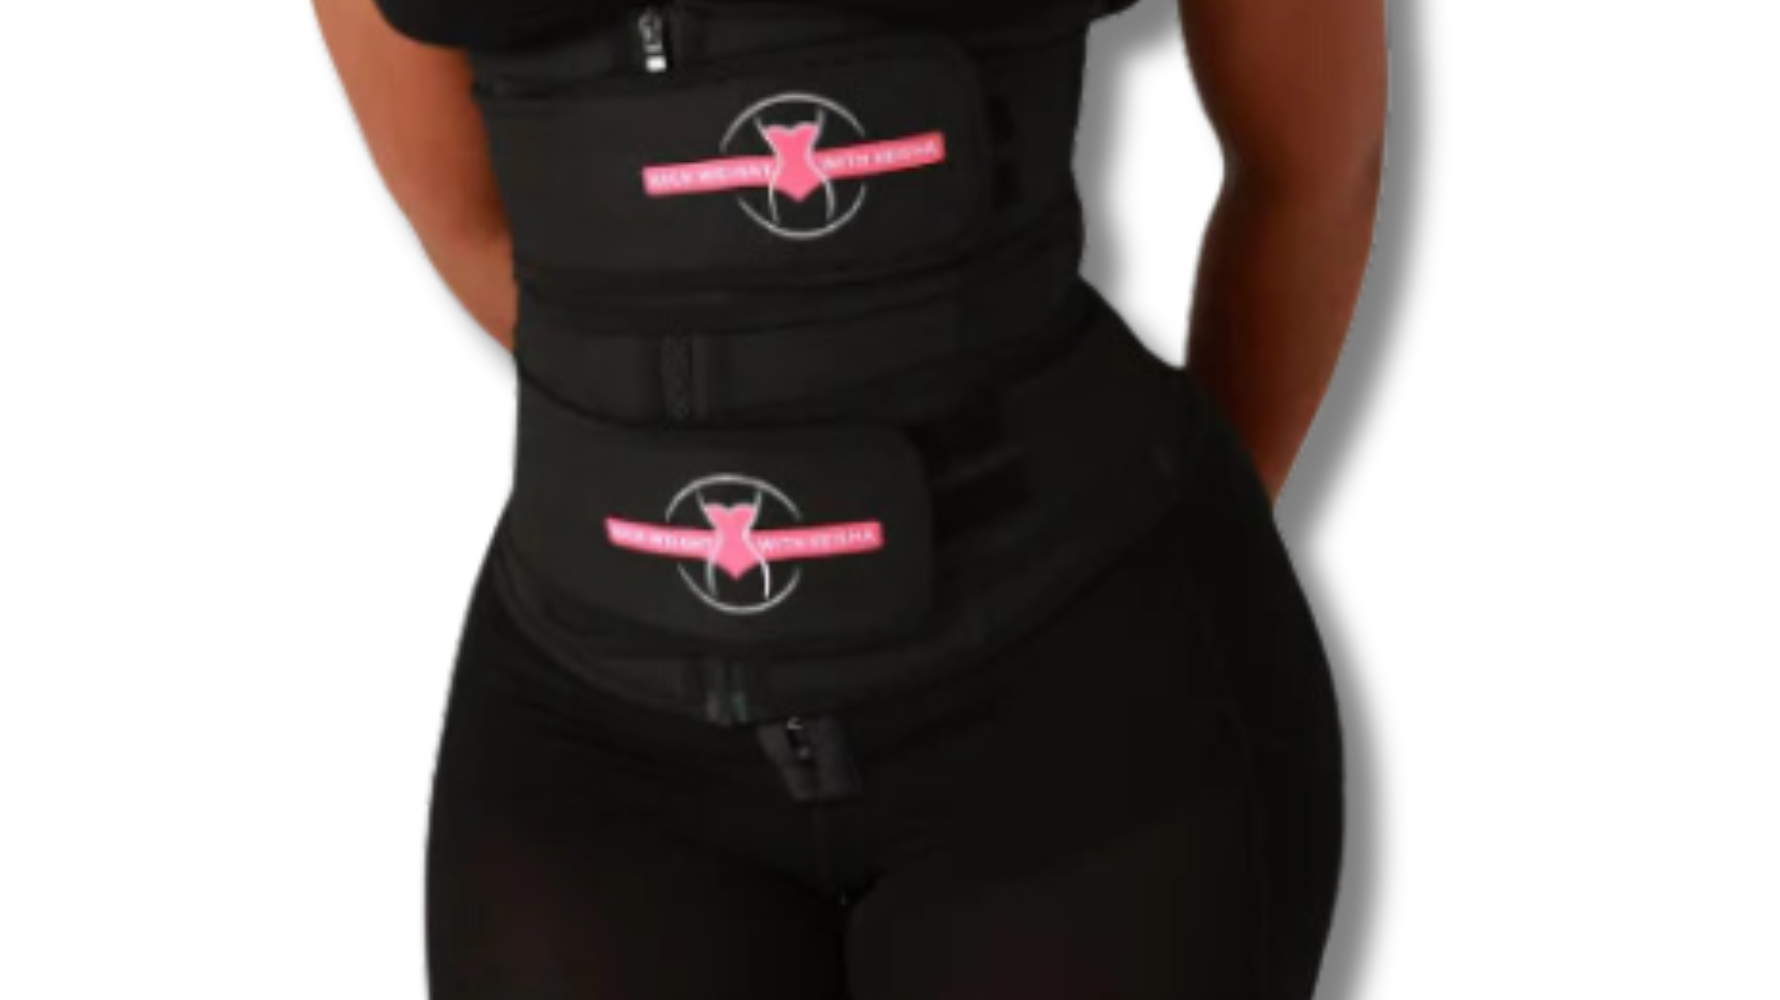 Do Waist Trainers Work? A Look at the Benefits and Cautions